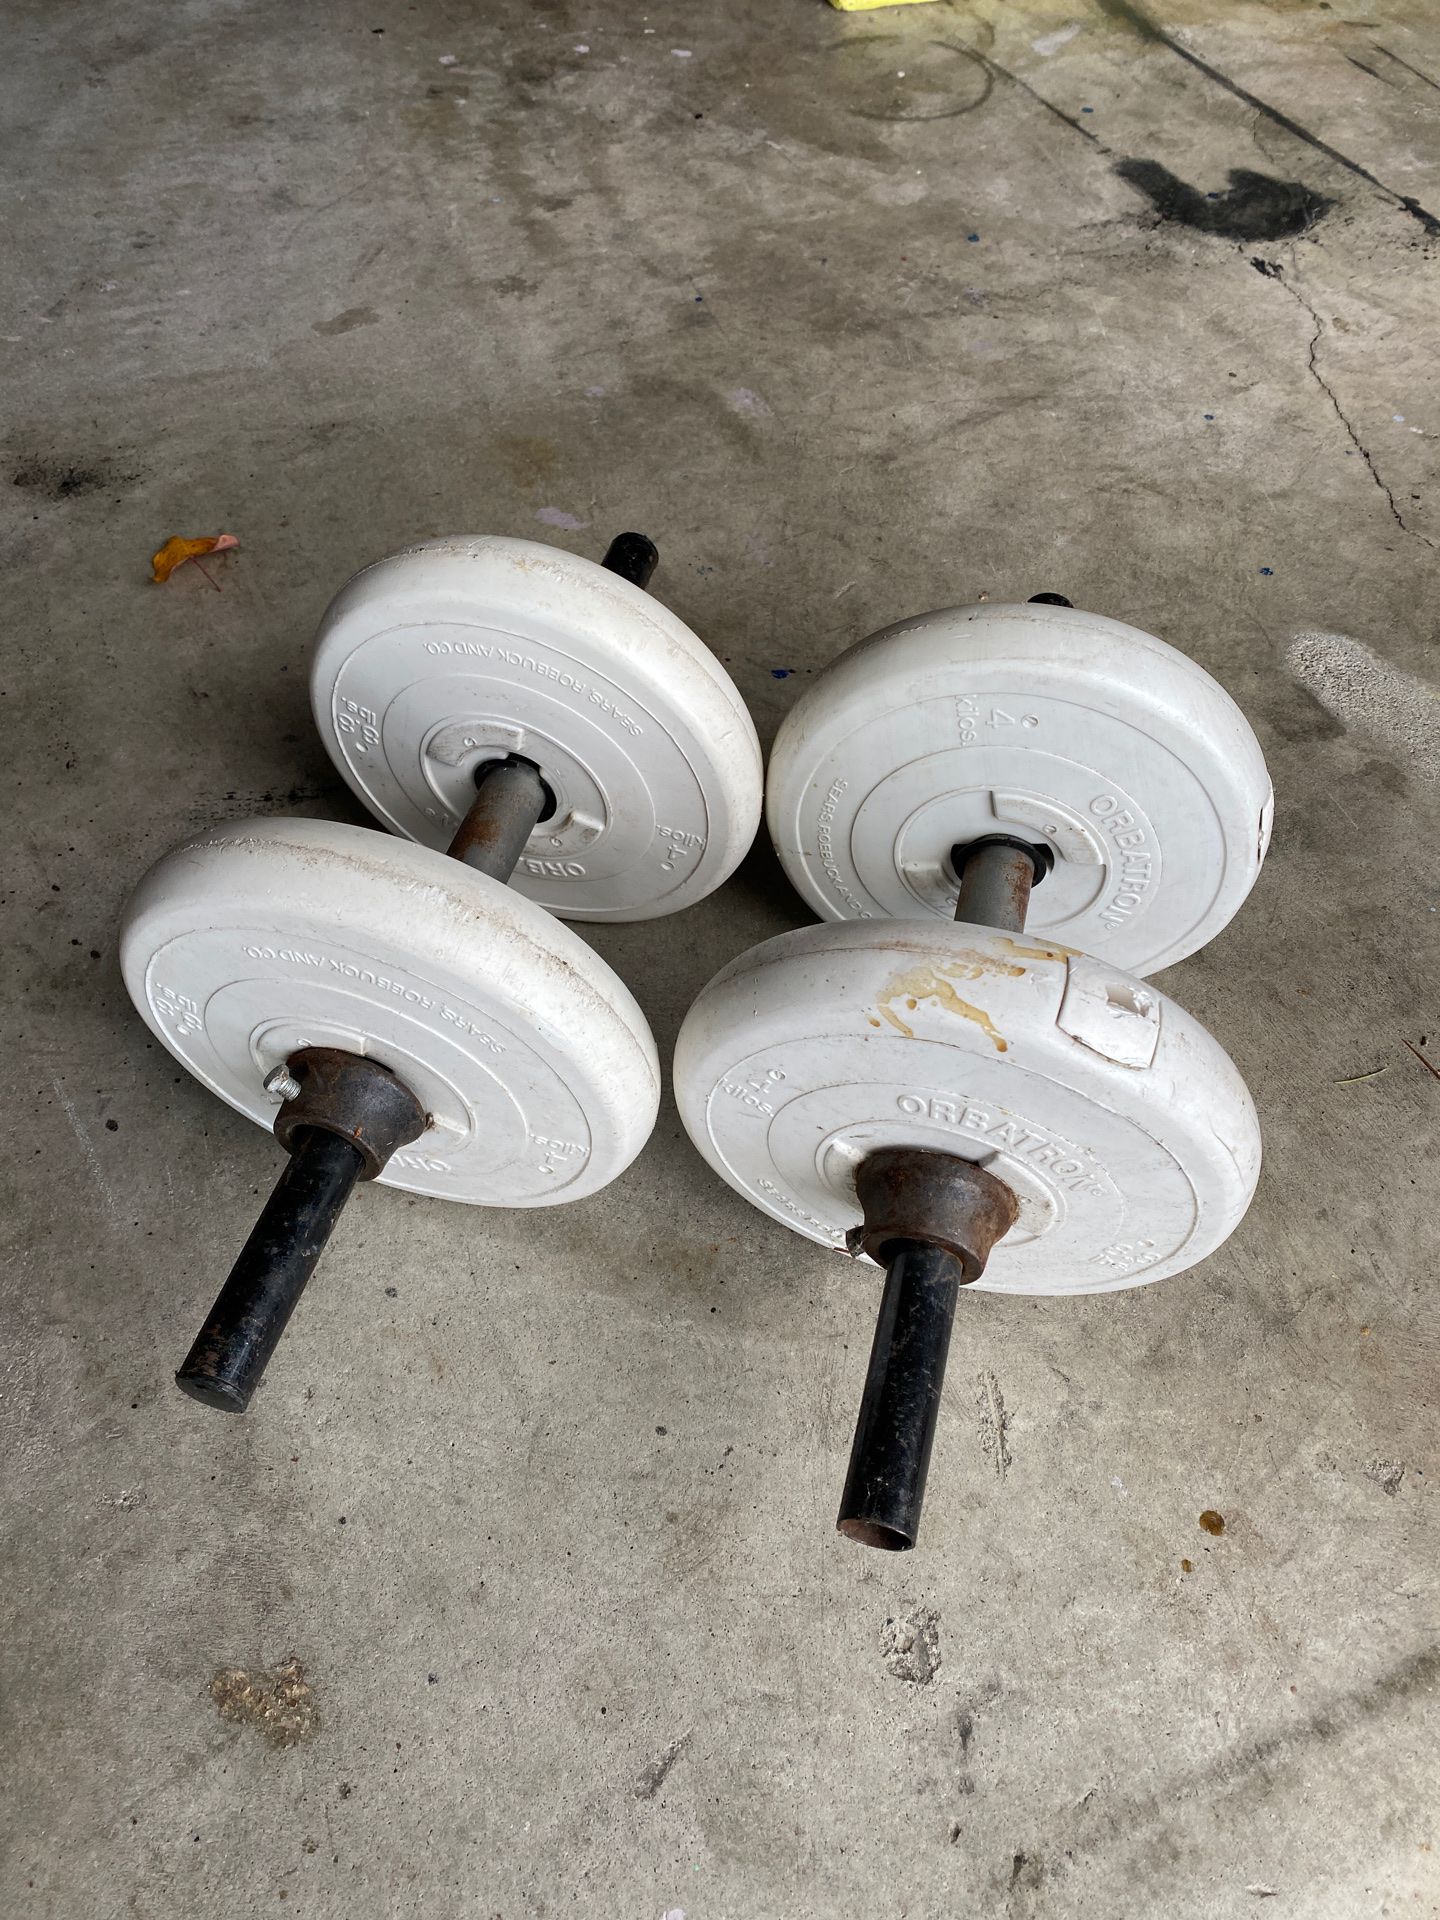 Plastic/Cement weight, 1”olympic bar, 2 curl bars, 100lbs of weights